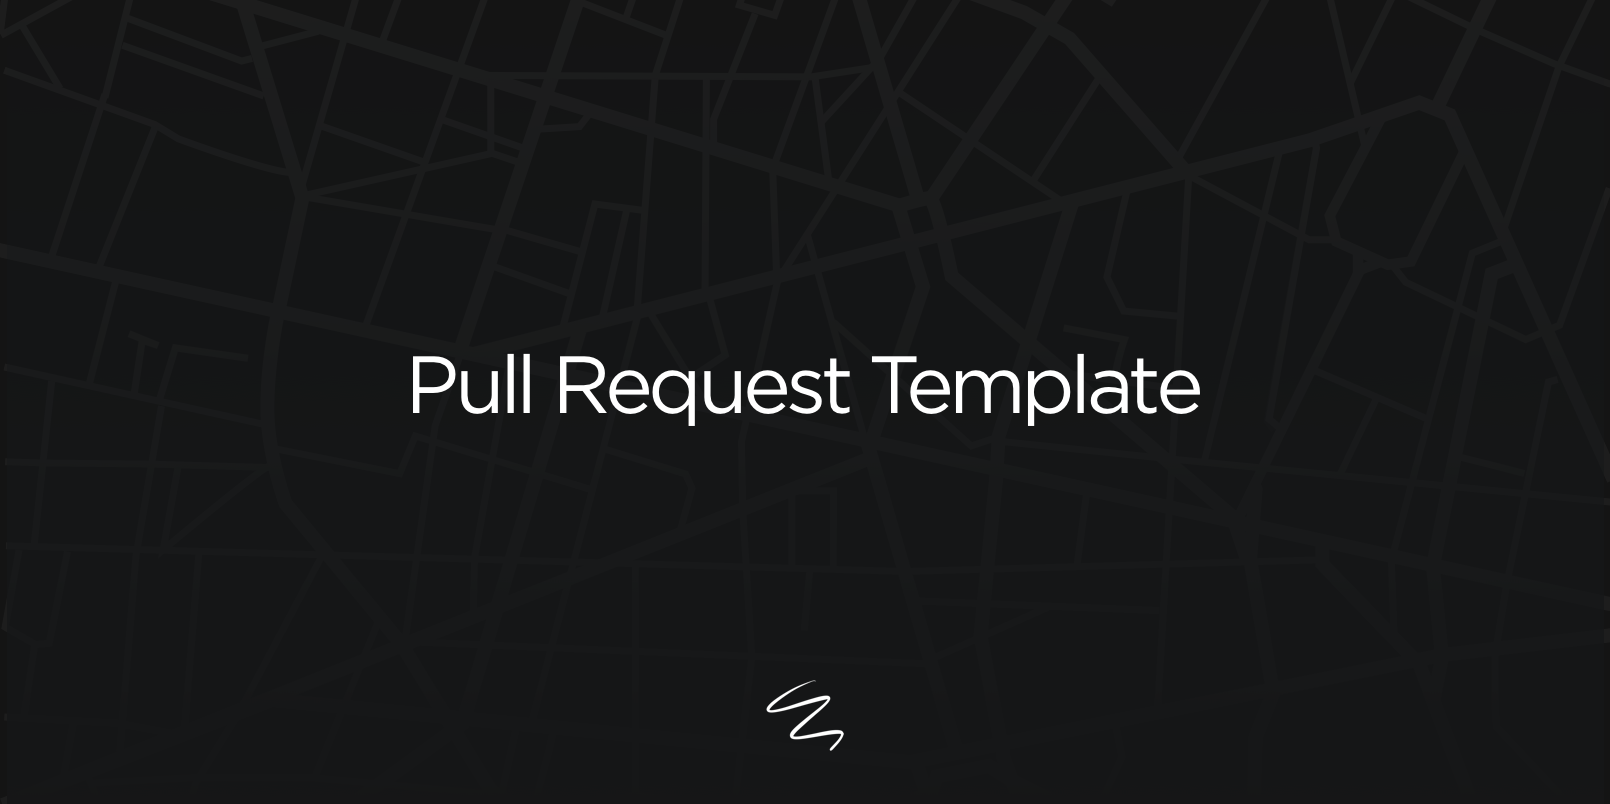 Pull Request Template Image